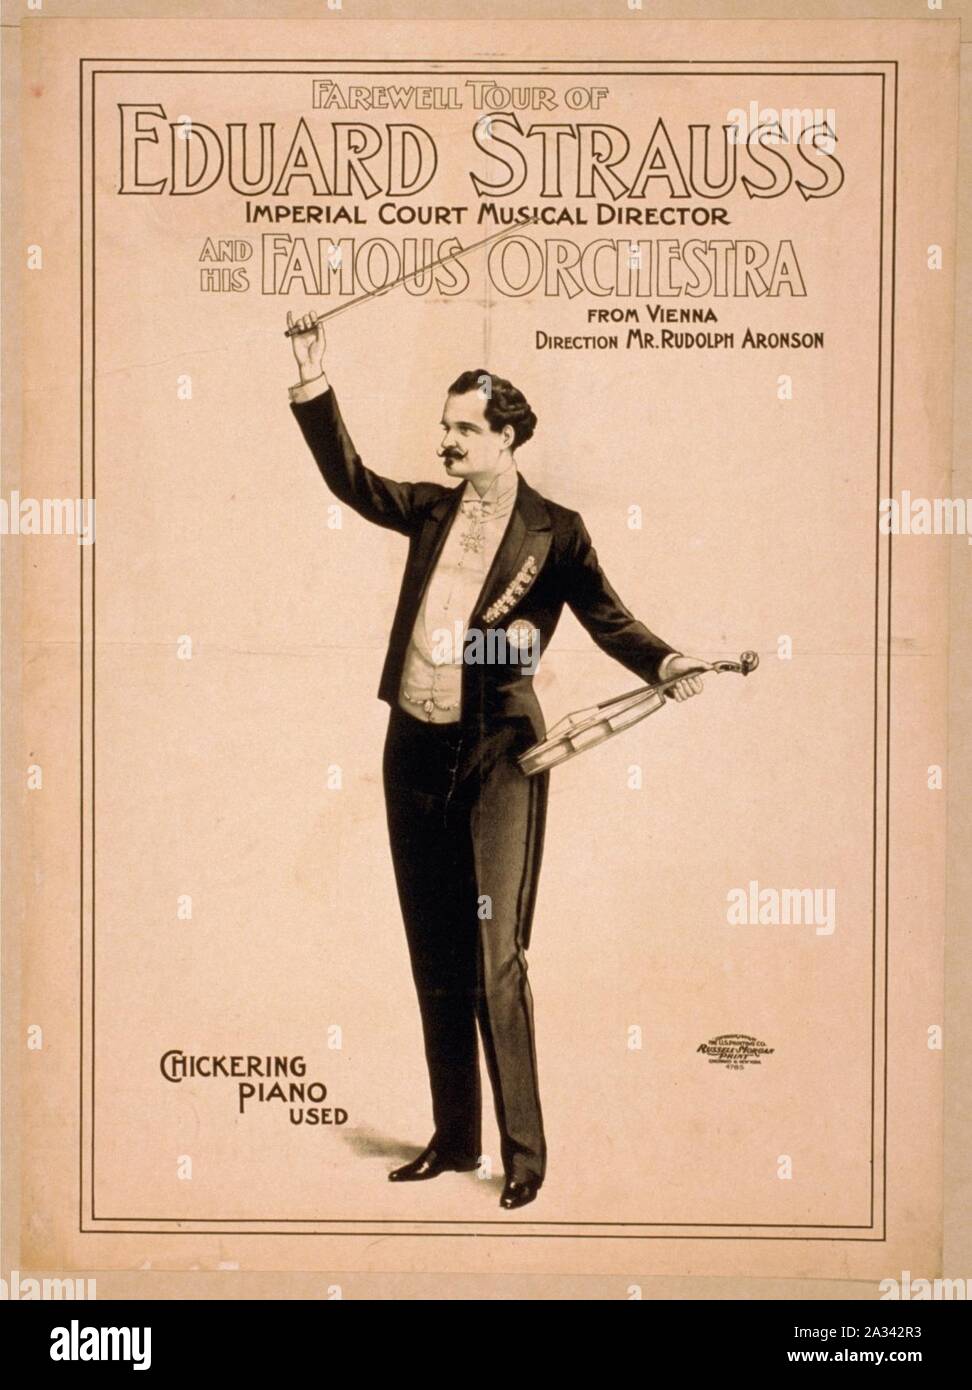 Farewell tour of Eduard Strauss, Imperial Court musical director and his famous orchestra from Vienna Stock Photo